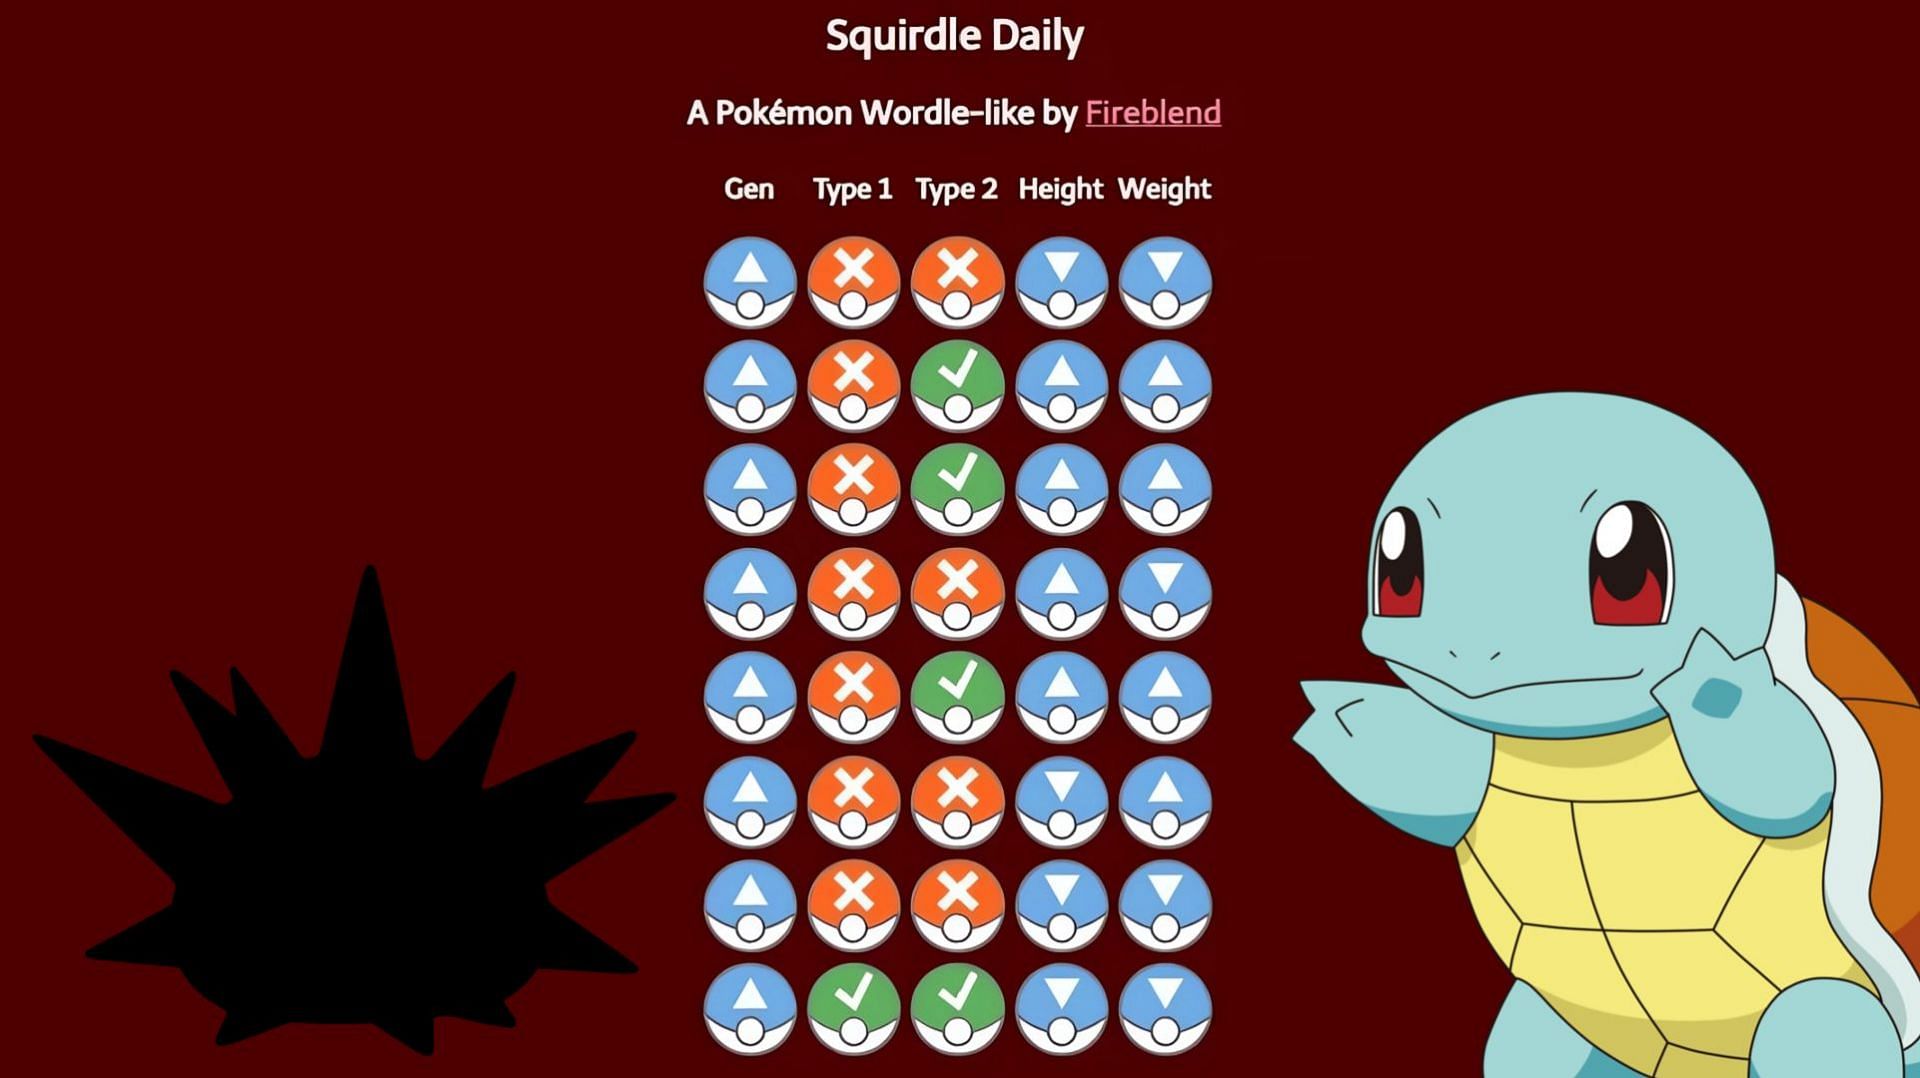 Squirdle is a game that mixes the guessing of Wordle with the world of Pokemon.